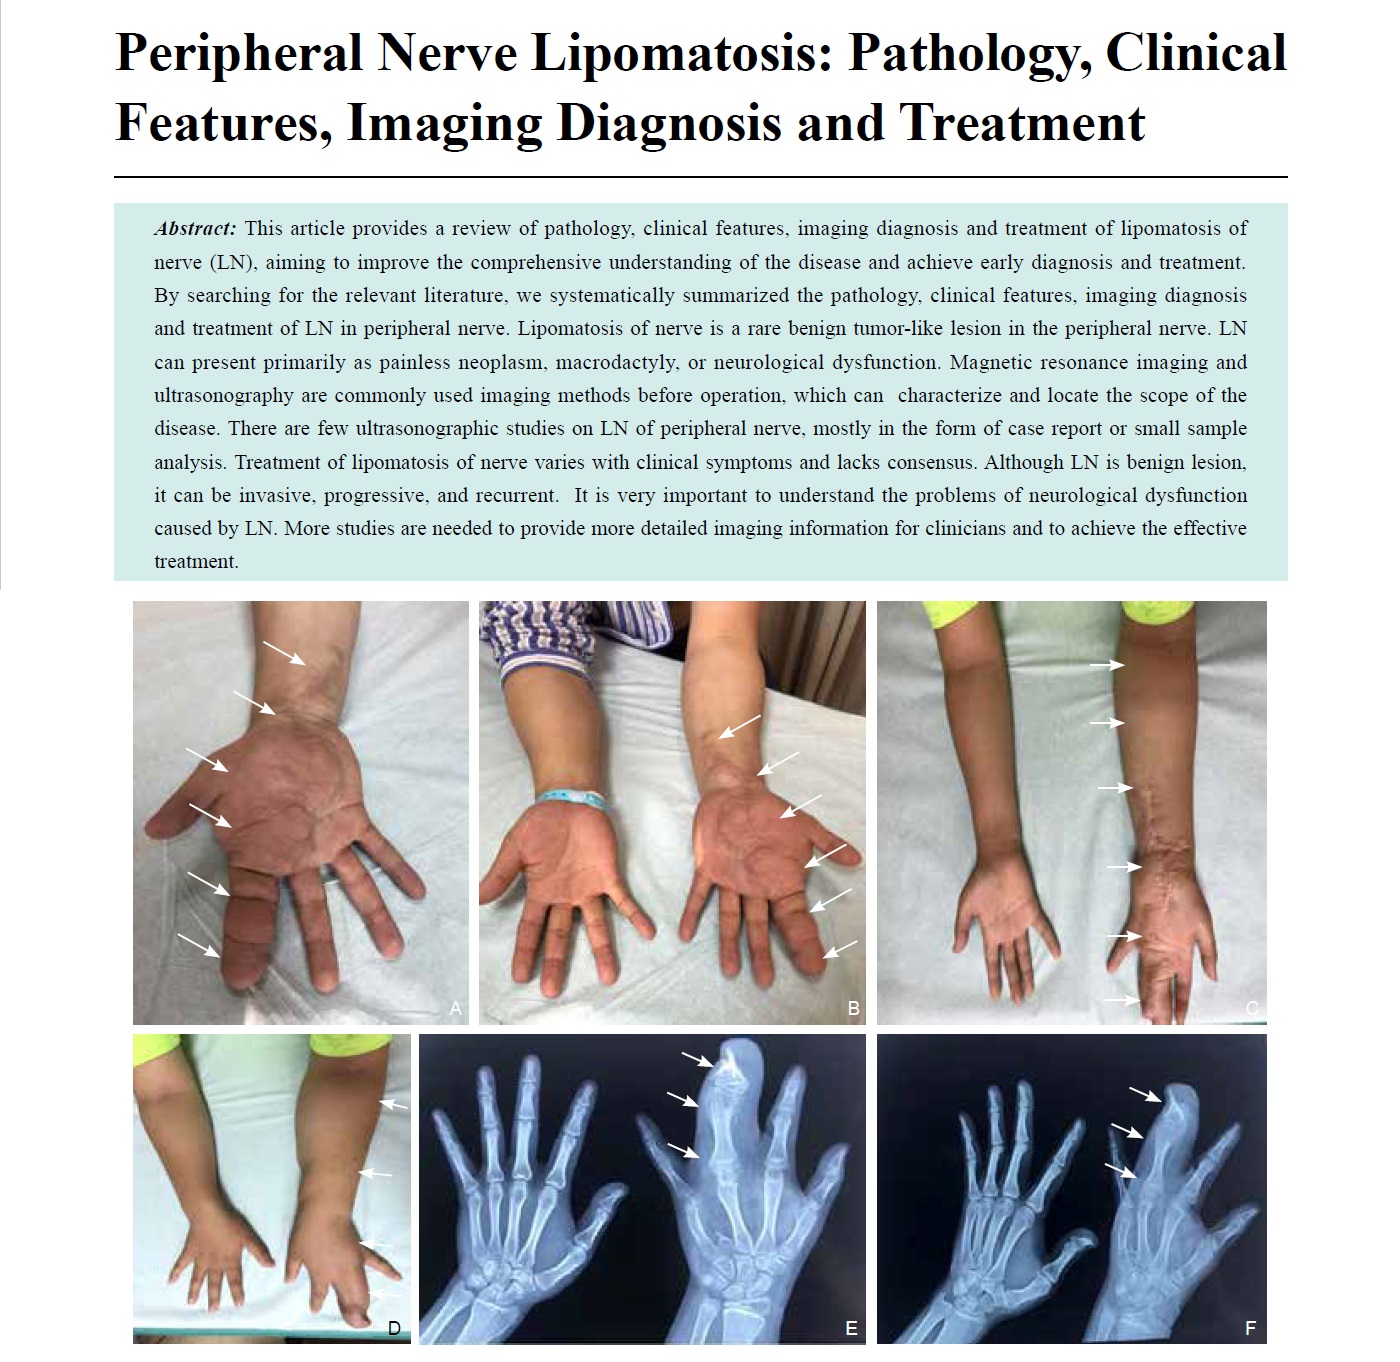 Peripheral Nerve Lipomatosis: Pathology, Clinical Features, Imaging Diagnosis and Treatment